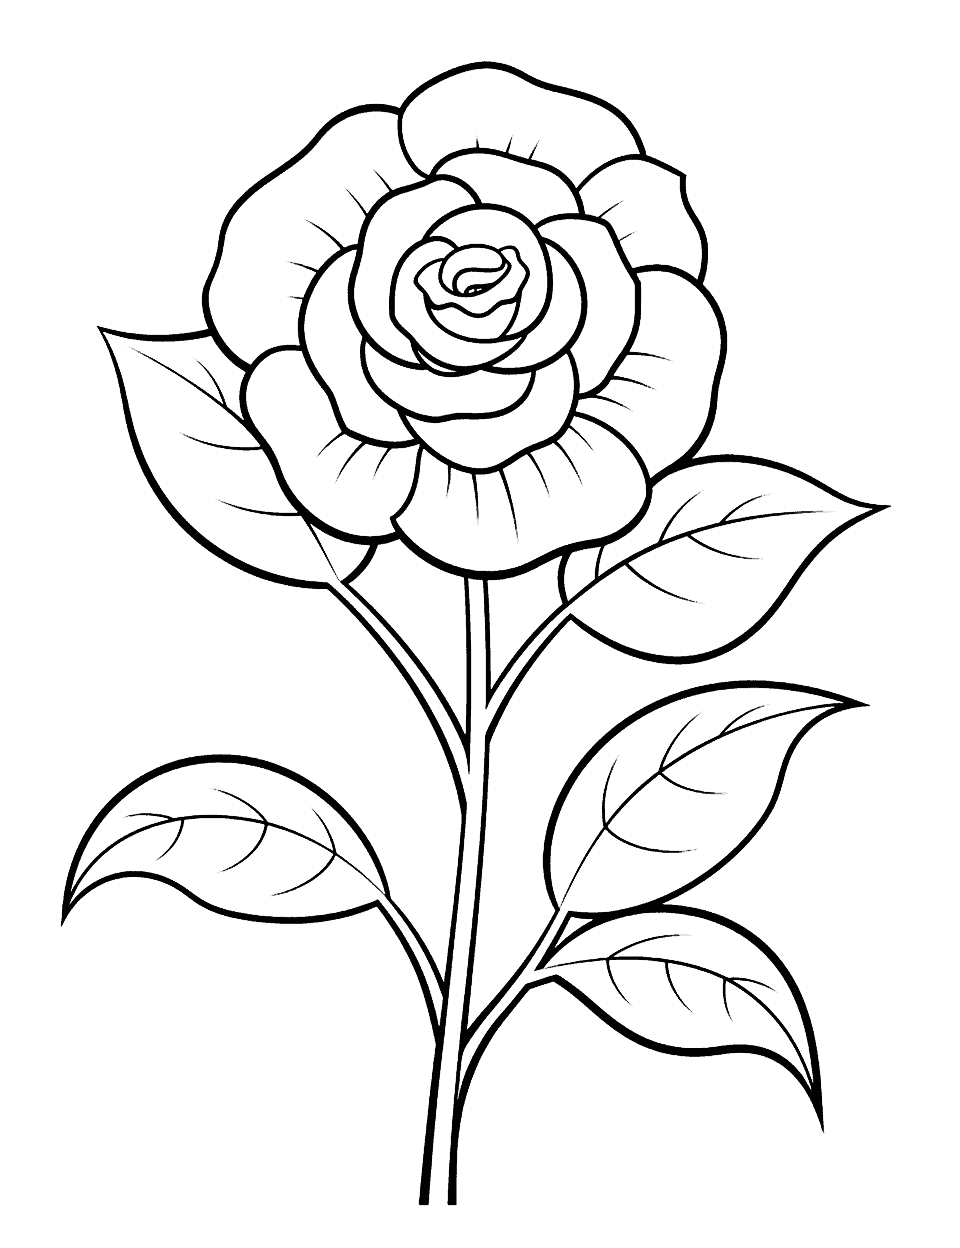 Kindergarten's First Rose Flower Coloring Page - A very simple and large rose perfect for kindergarten children.